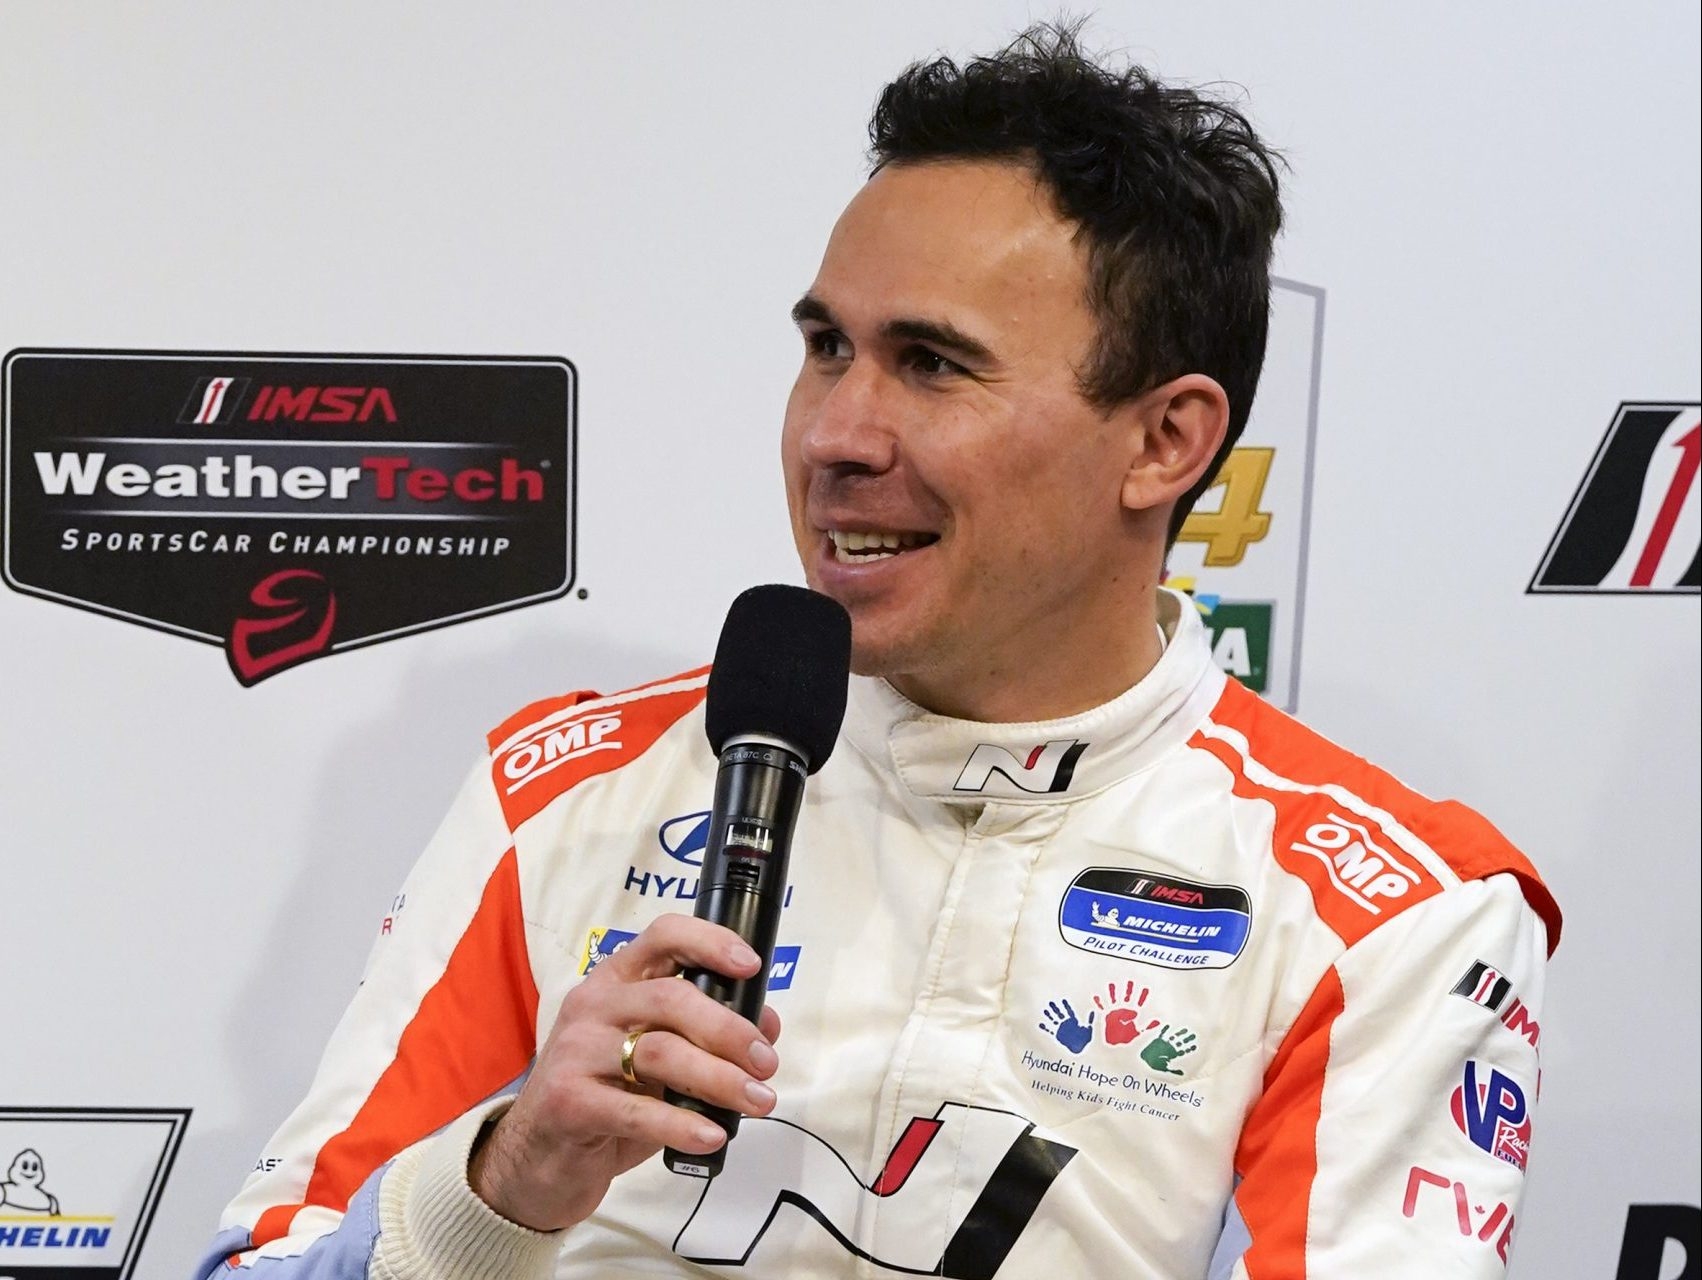 Robert Wickens caps week with another win and birth of son